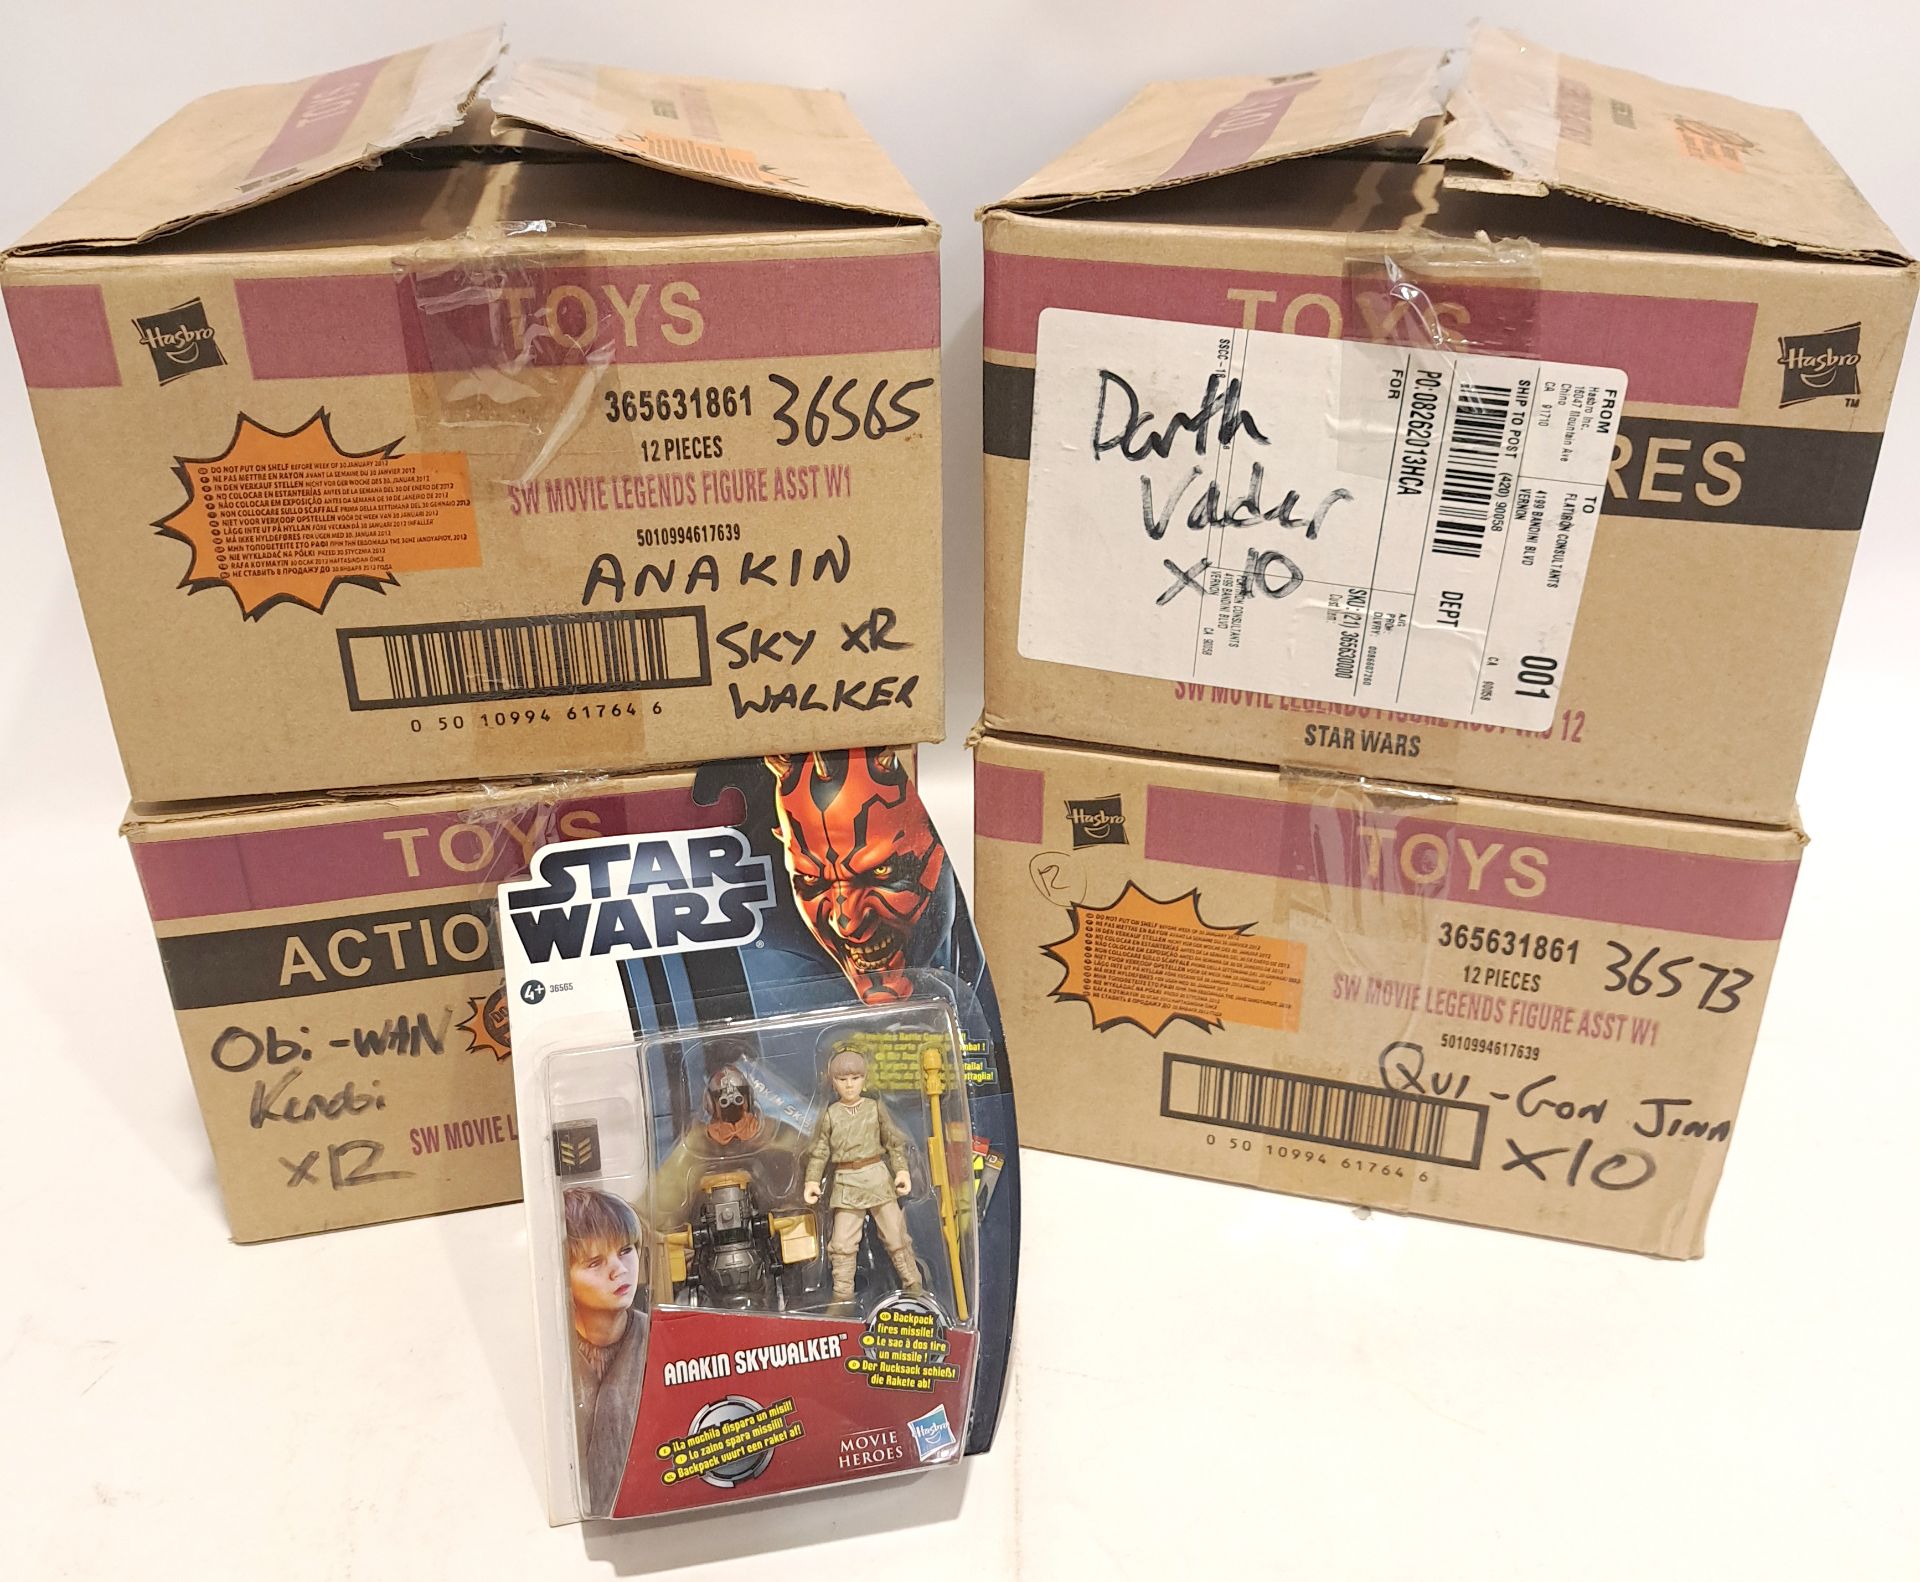 Hasbro Star Wars Movie Legends Action Figures within Trade Packaging x4